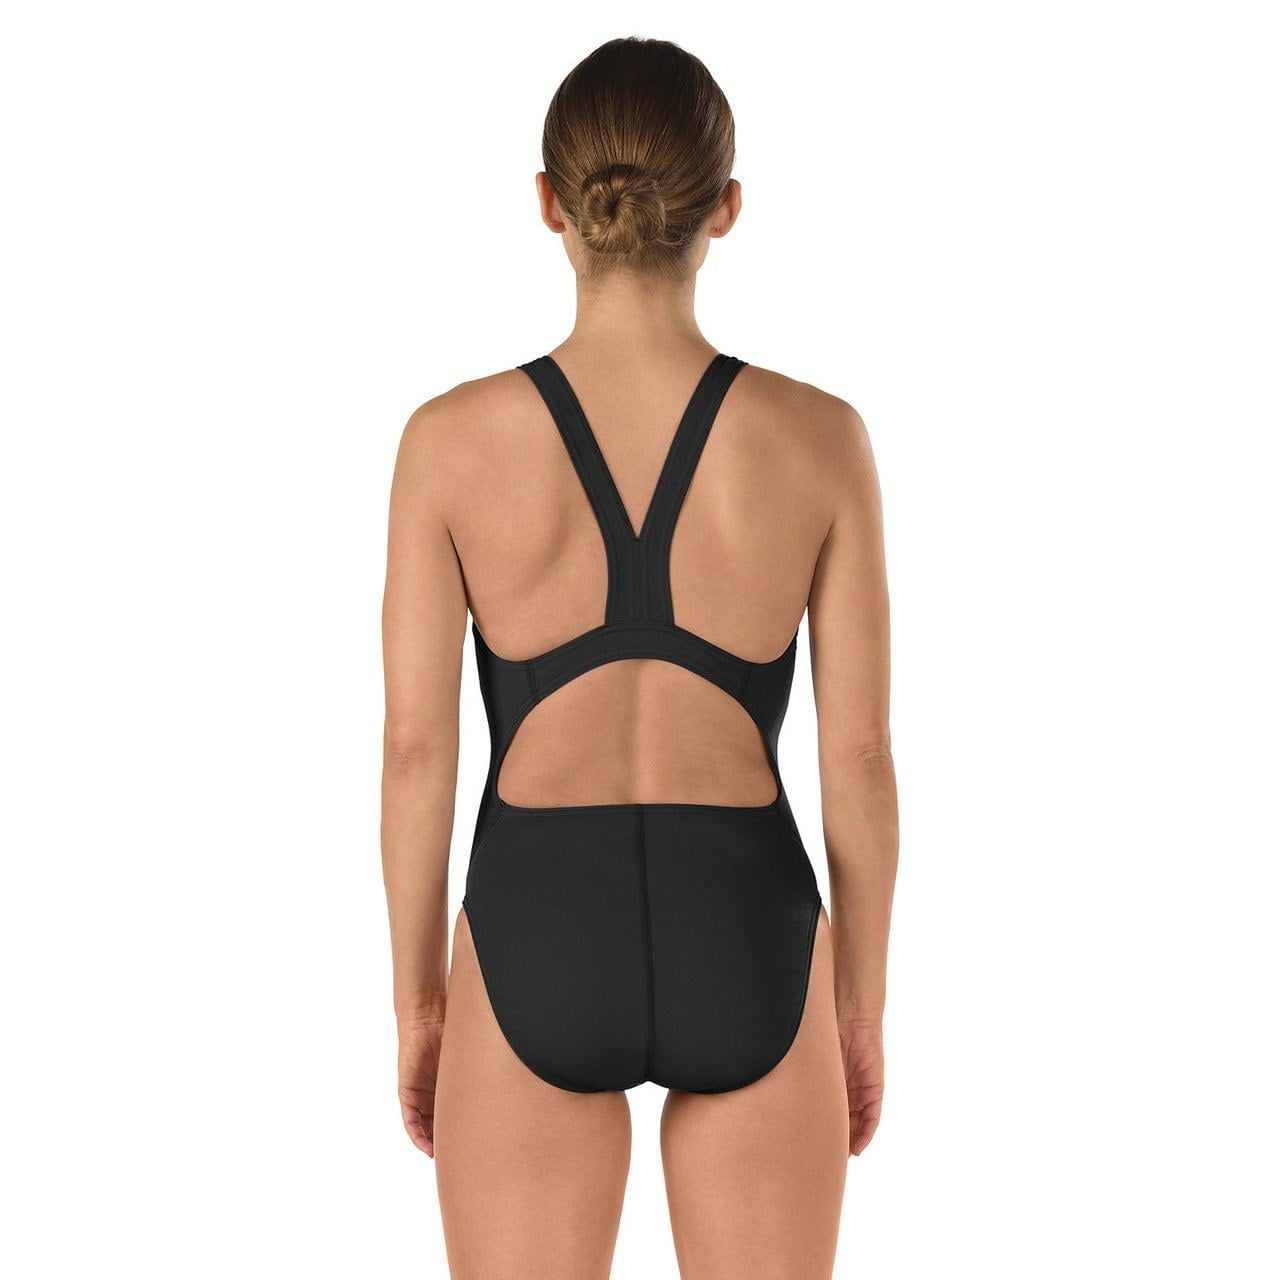 Swimsuit Black One Piece Youth Size 12/28 Train Tech III Details about   Speedo Endurance 